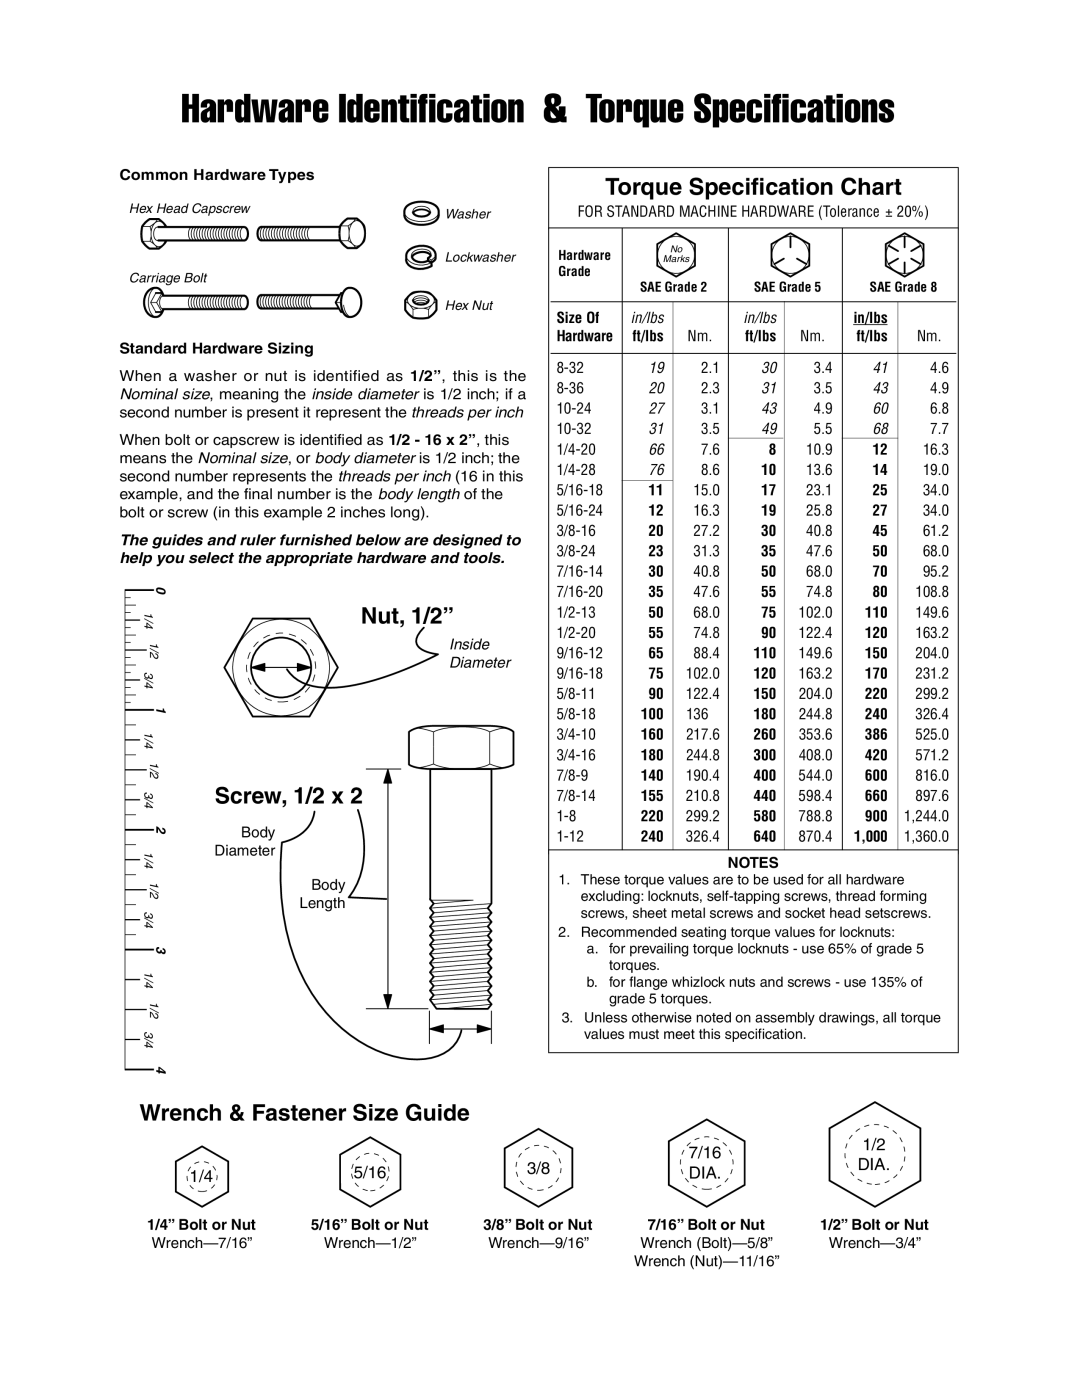 Simplicity 1694547 Wrench & Fastener Size Guide, Hardware Identification & Torque Specifications, Nut, 1/2”, Screw, 1/2 